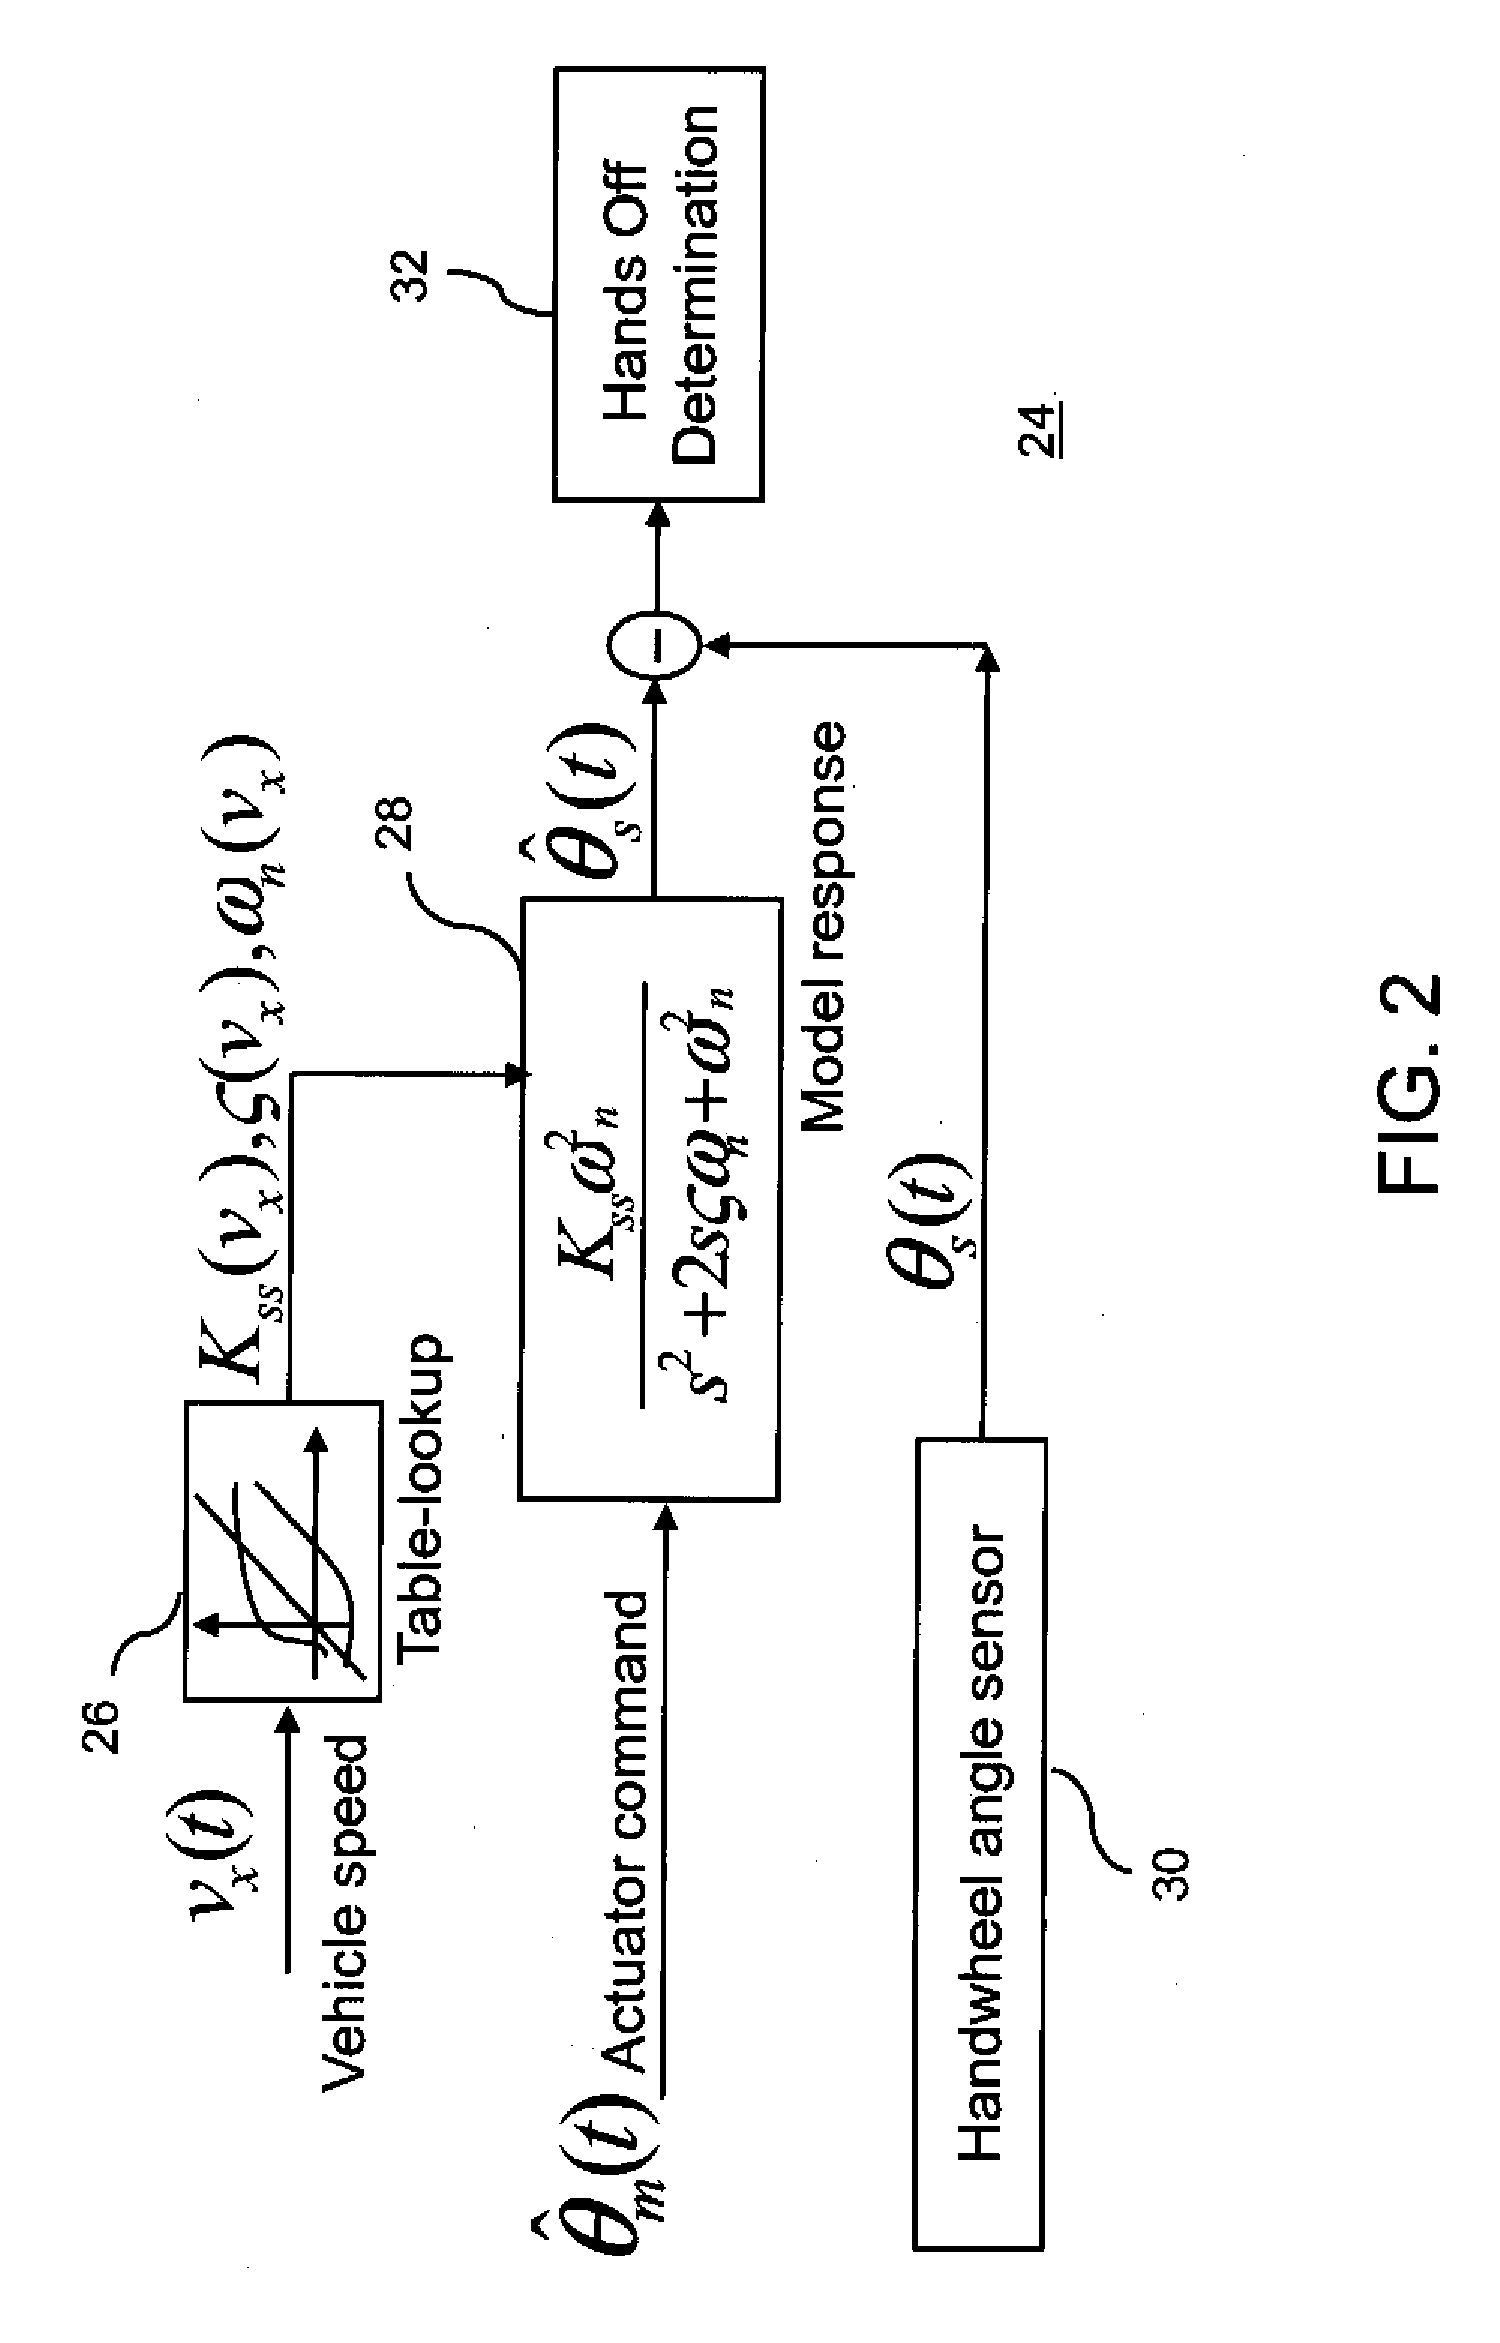 Method and apparatus for driver hands off detection for vehicles with active front steering system